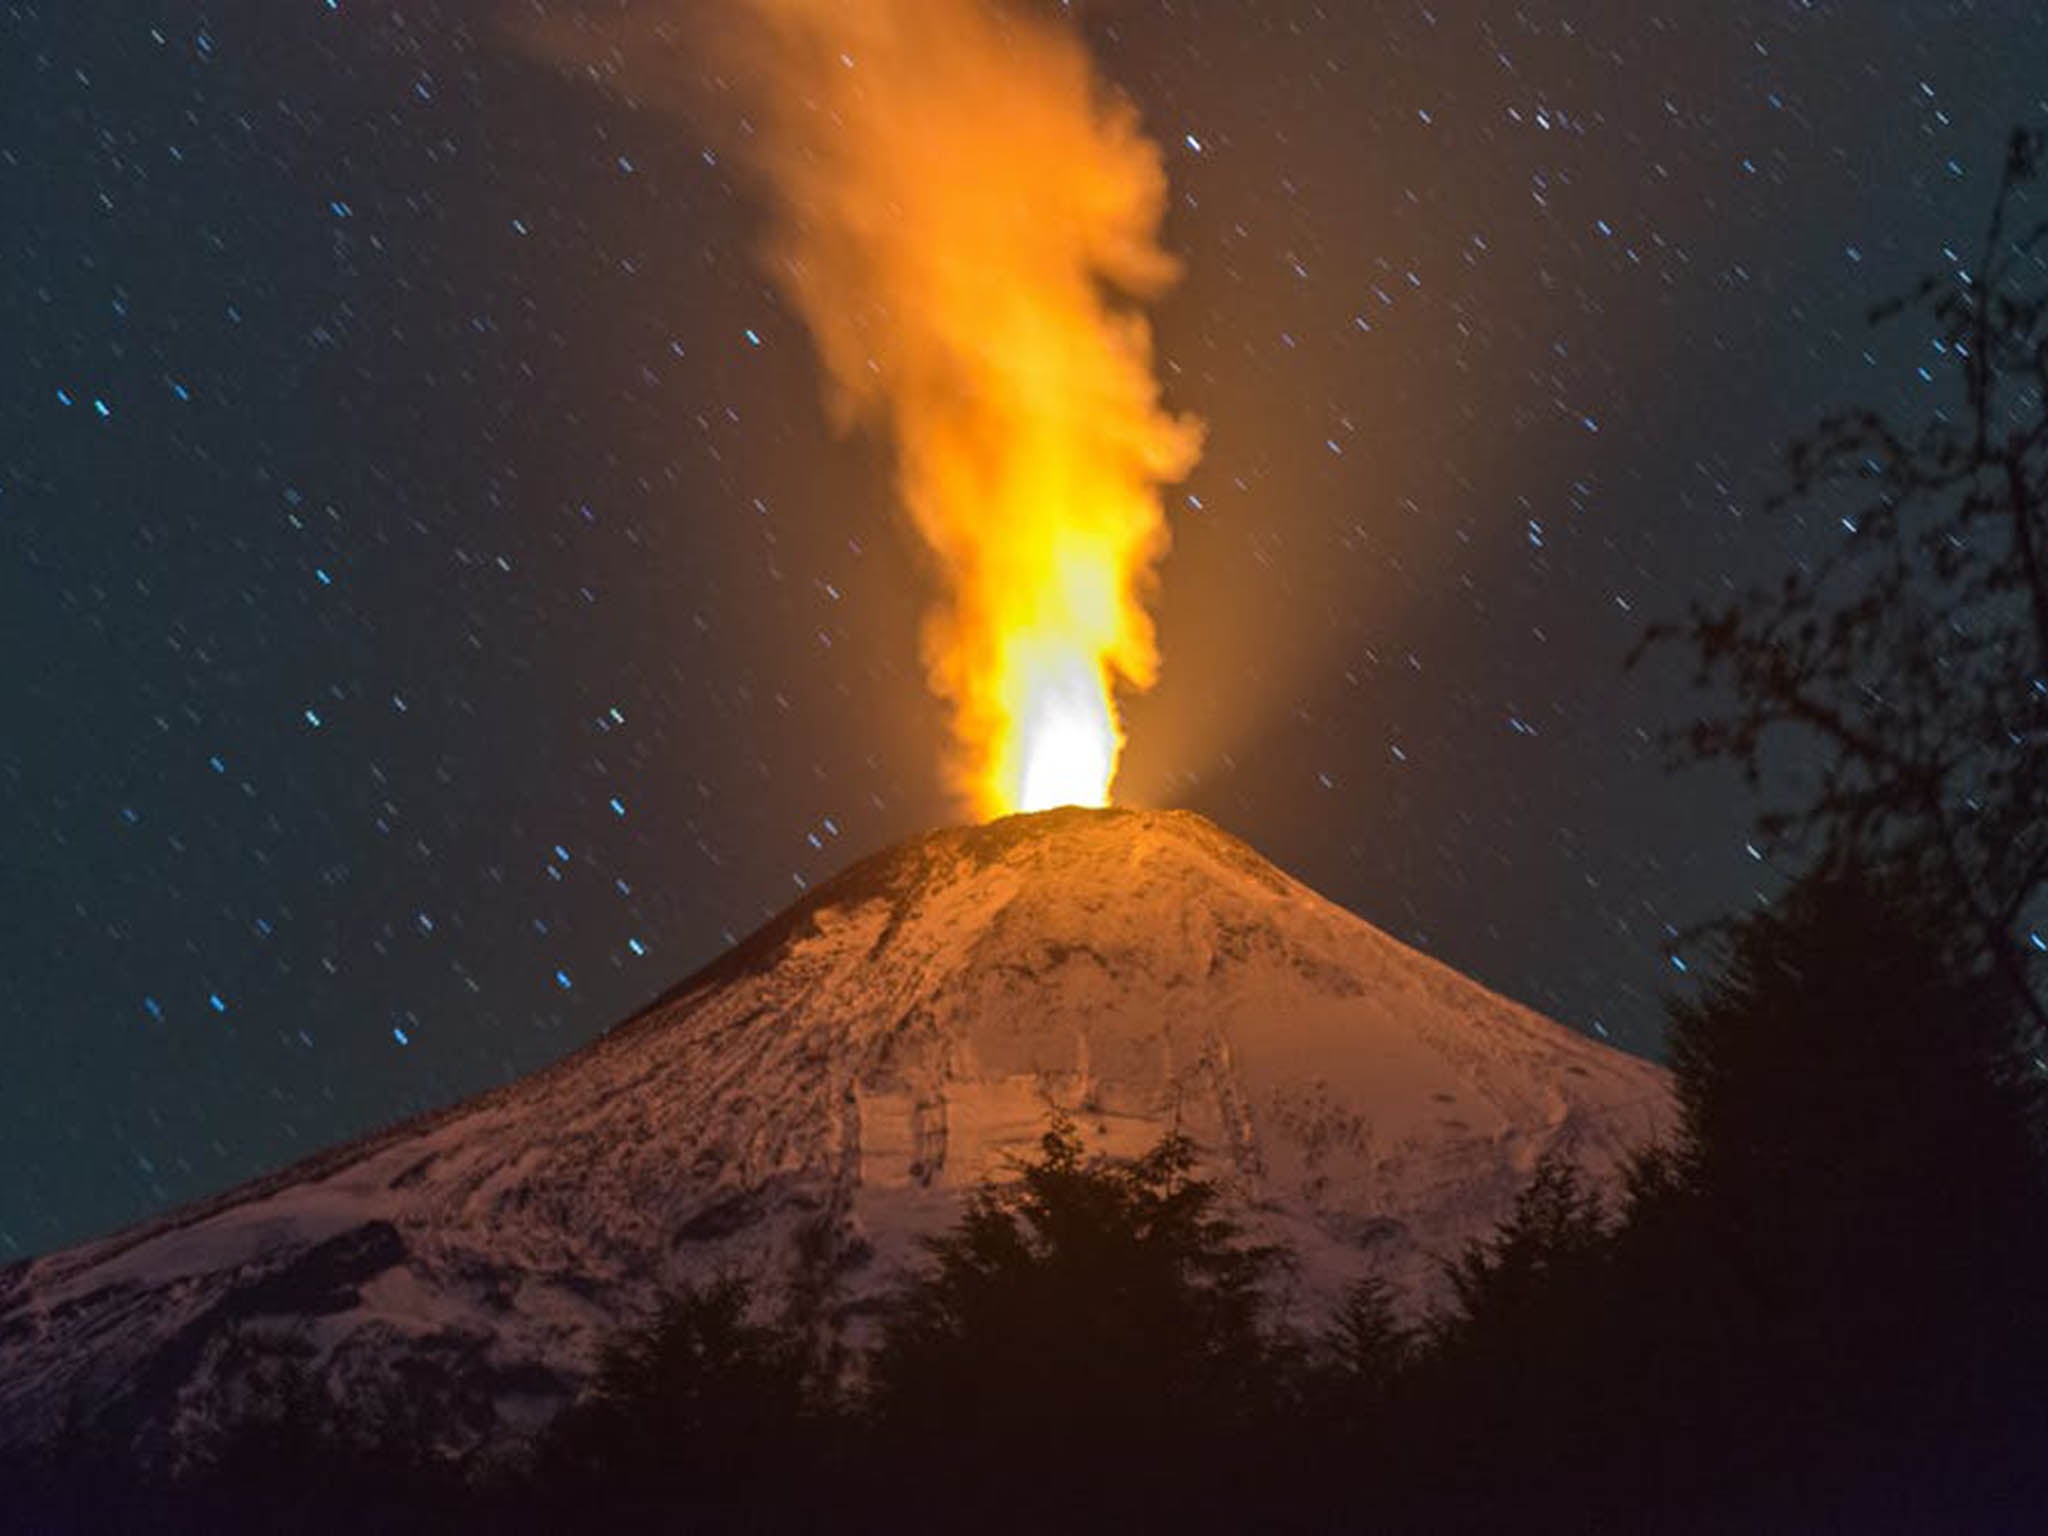 When Villarrica erupted in 2015, the volcano spewed ash and lava 1,000m into the air